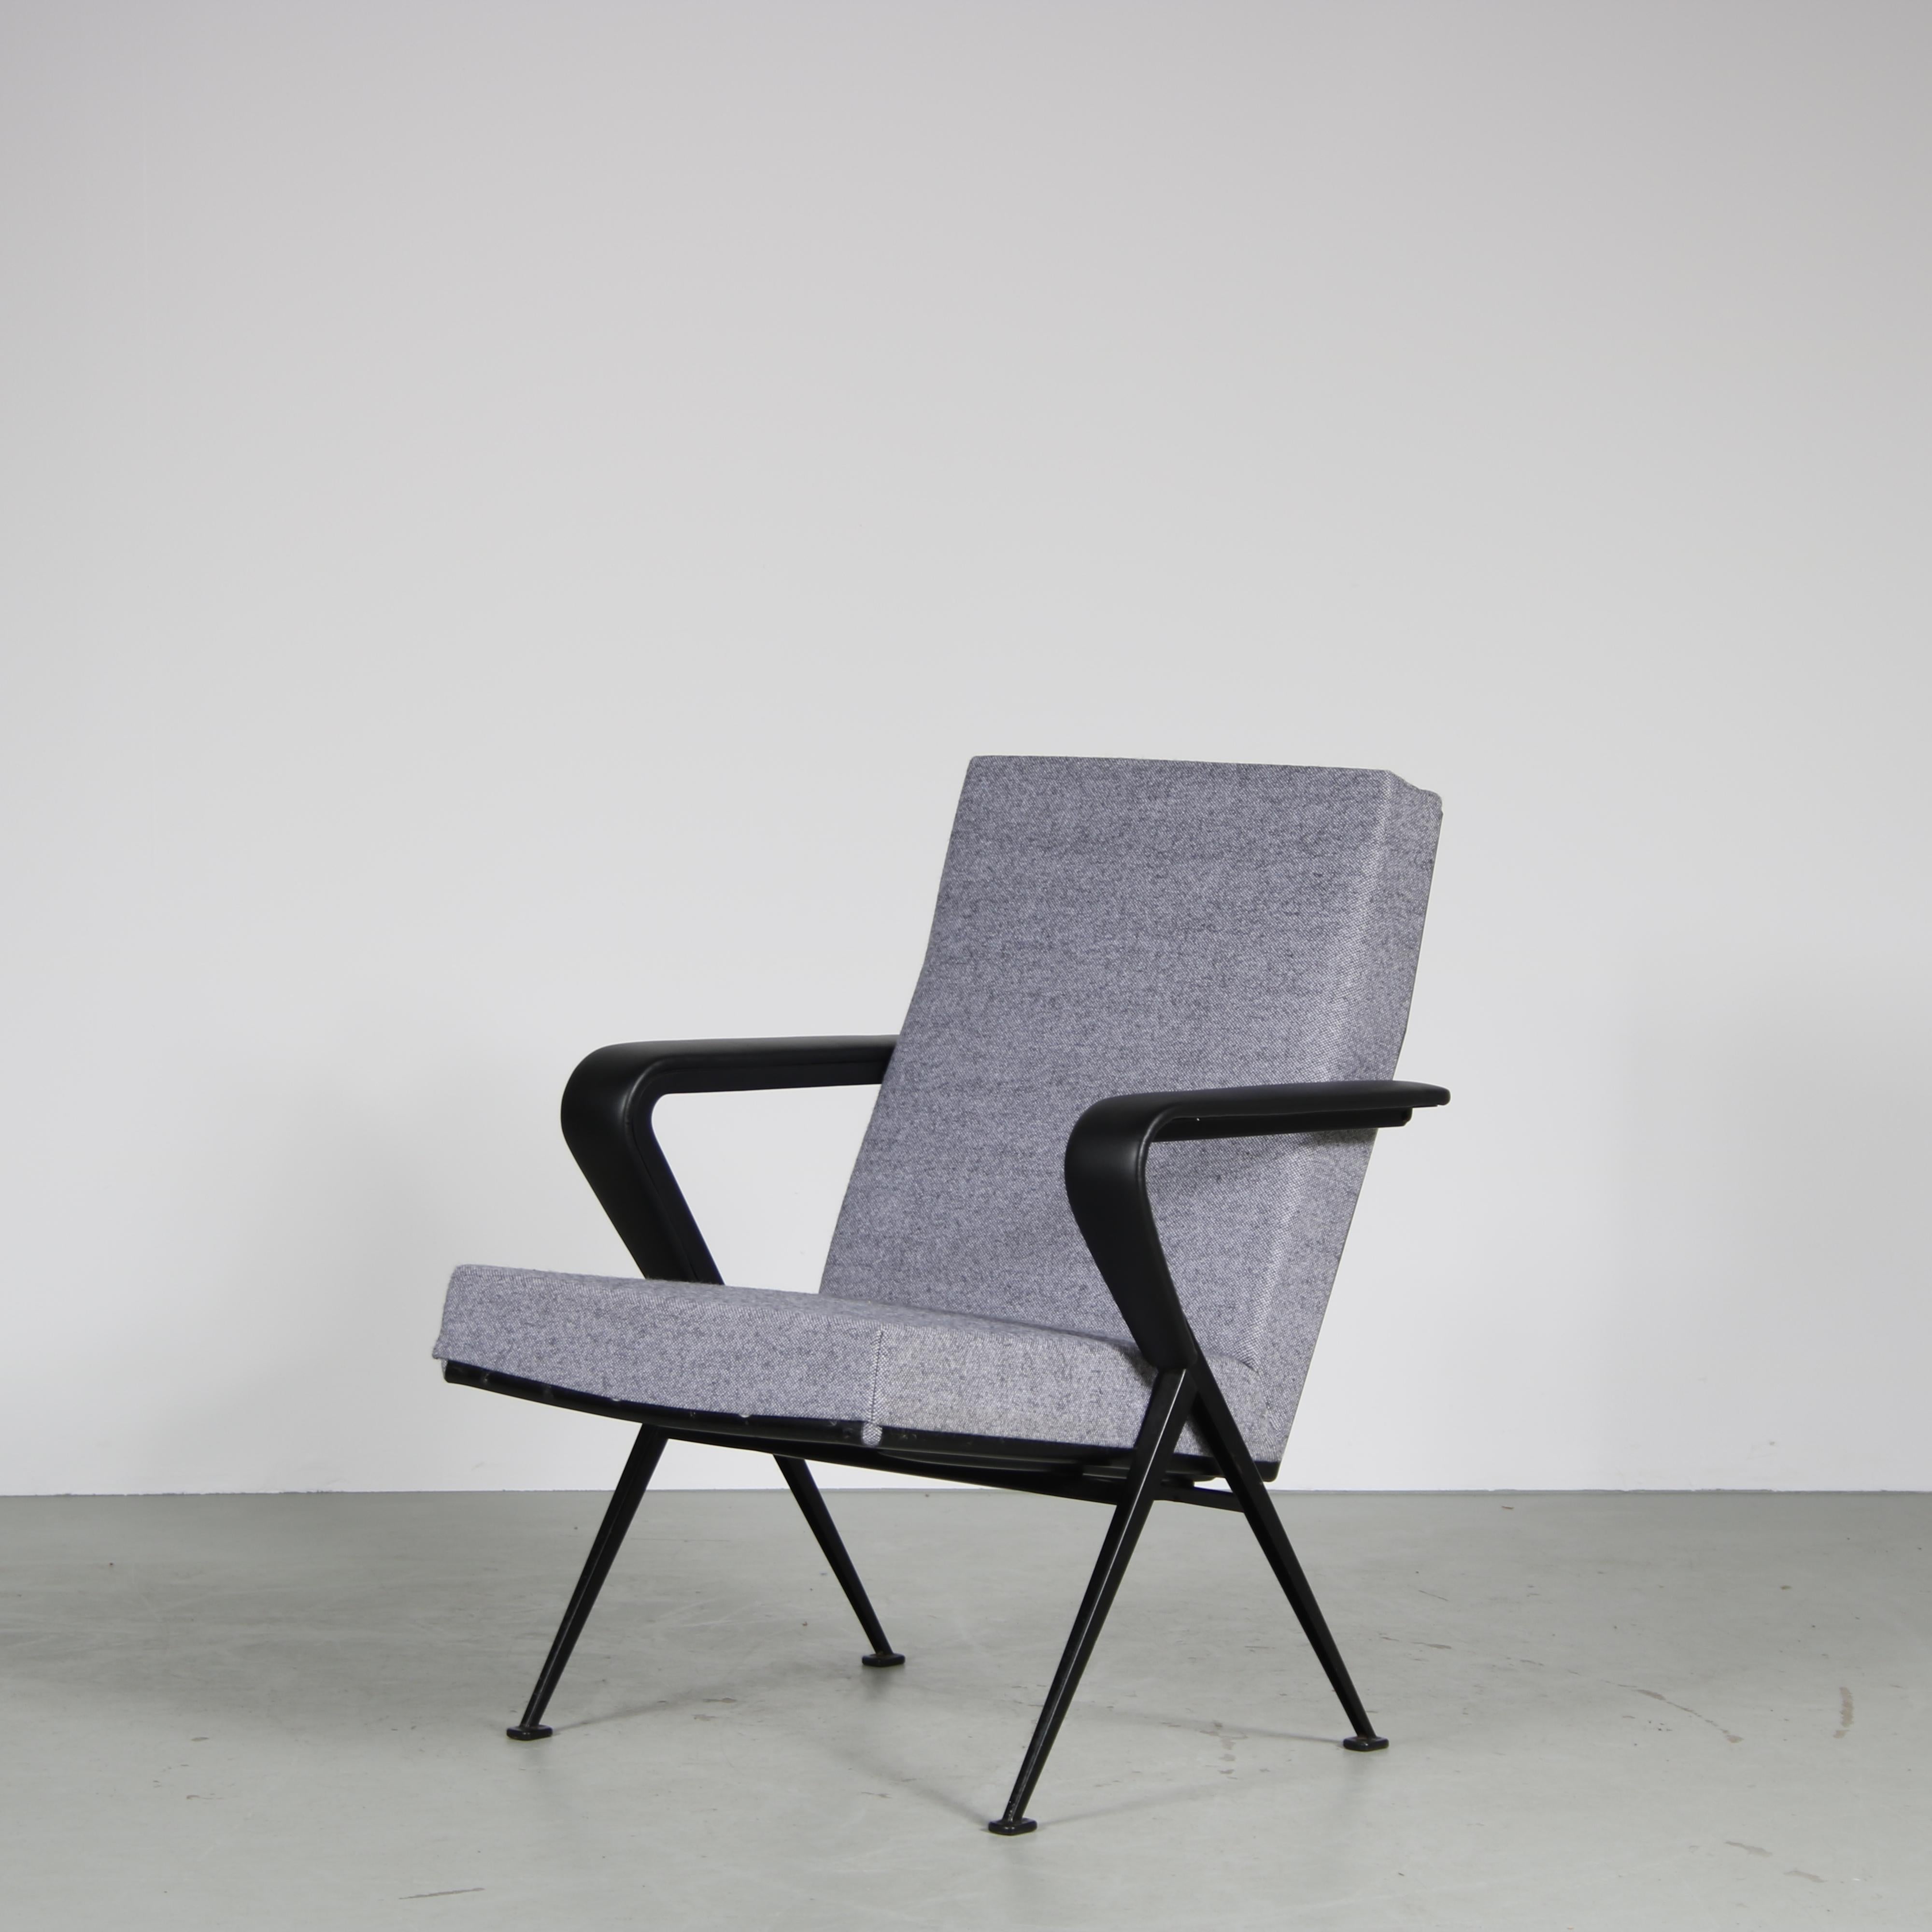 A fantastic lounge chair, model “Repose”, designed by Friso Kramer and manufactured by Ahrend de Cirkel in the Netherlands around 1960.

This eye-catching chair is an iconic find of midcentury Dutch design. It’s straight forward, modern yet